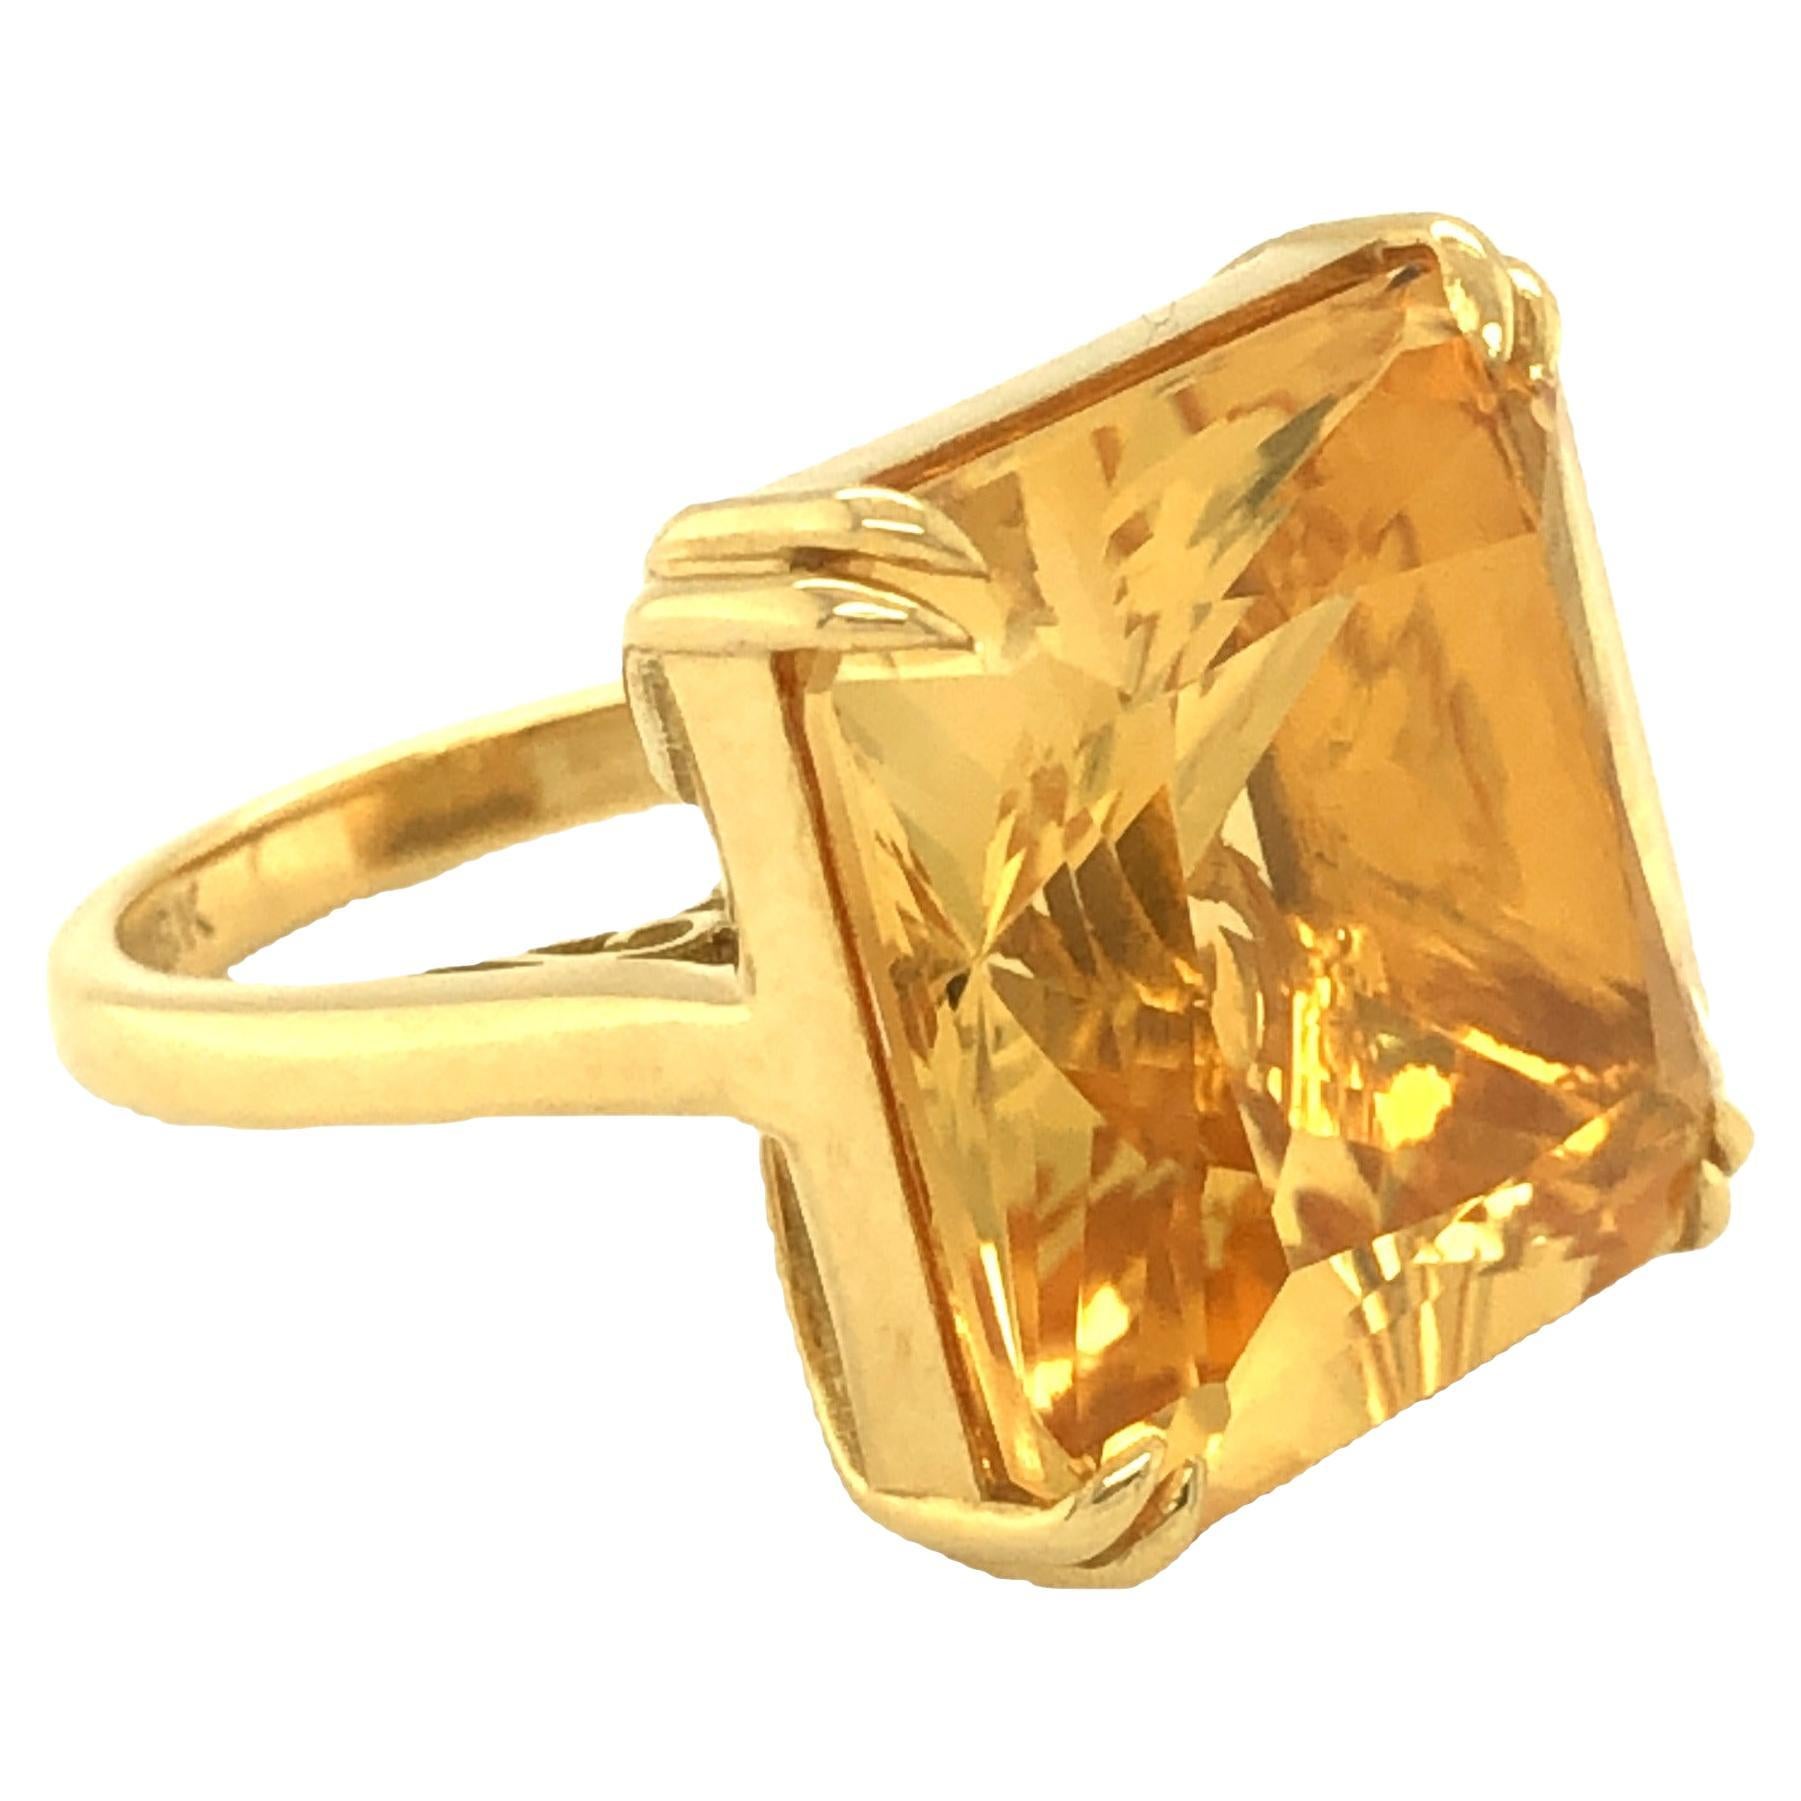 Gems Are Forever 13 carat Citrine Solitaire Cocktail Ring 18K Yellow Gold